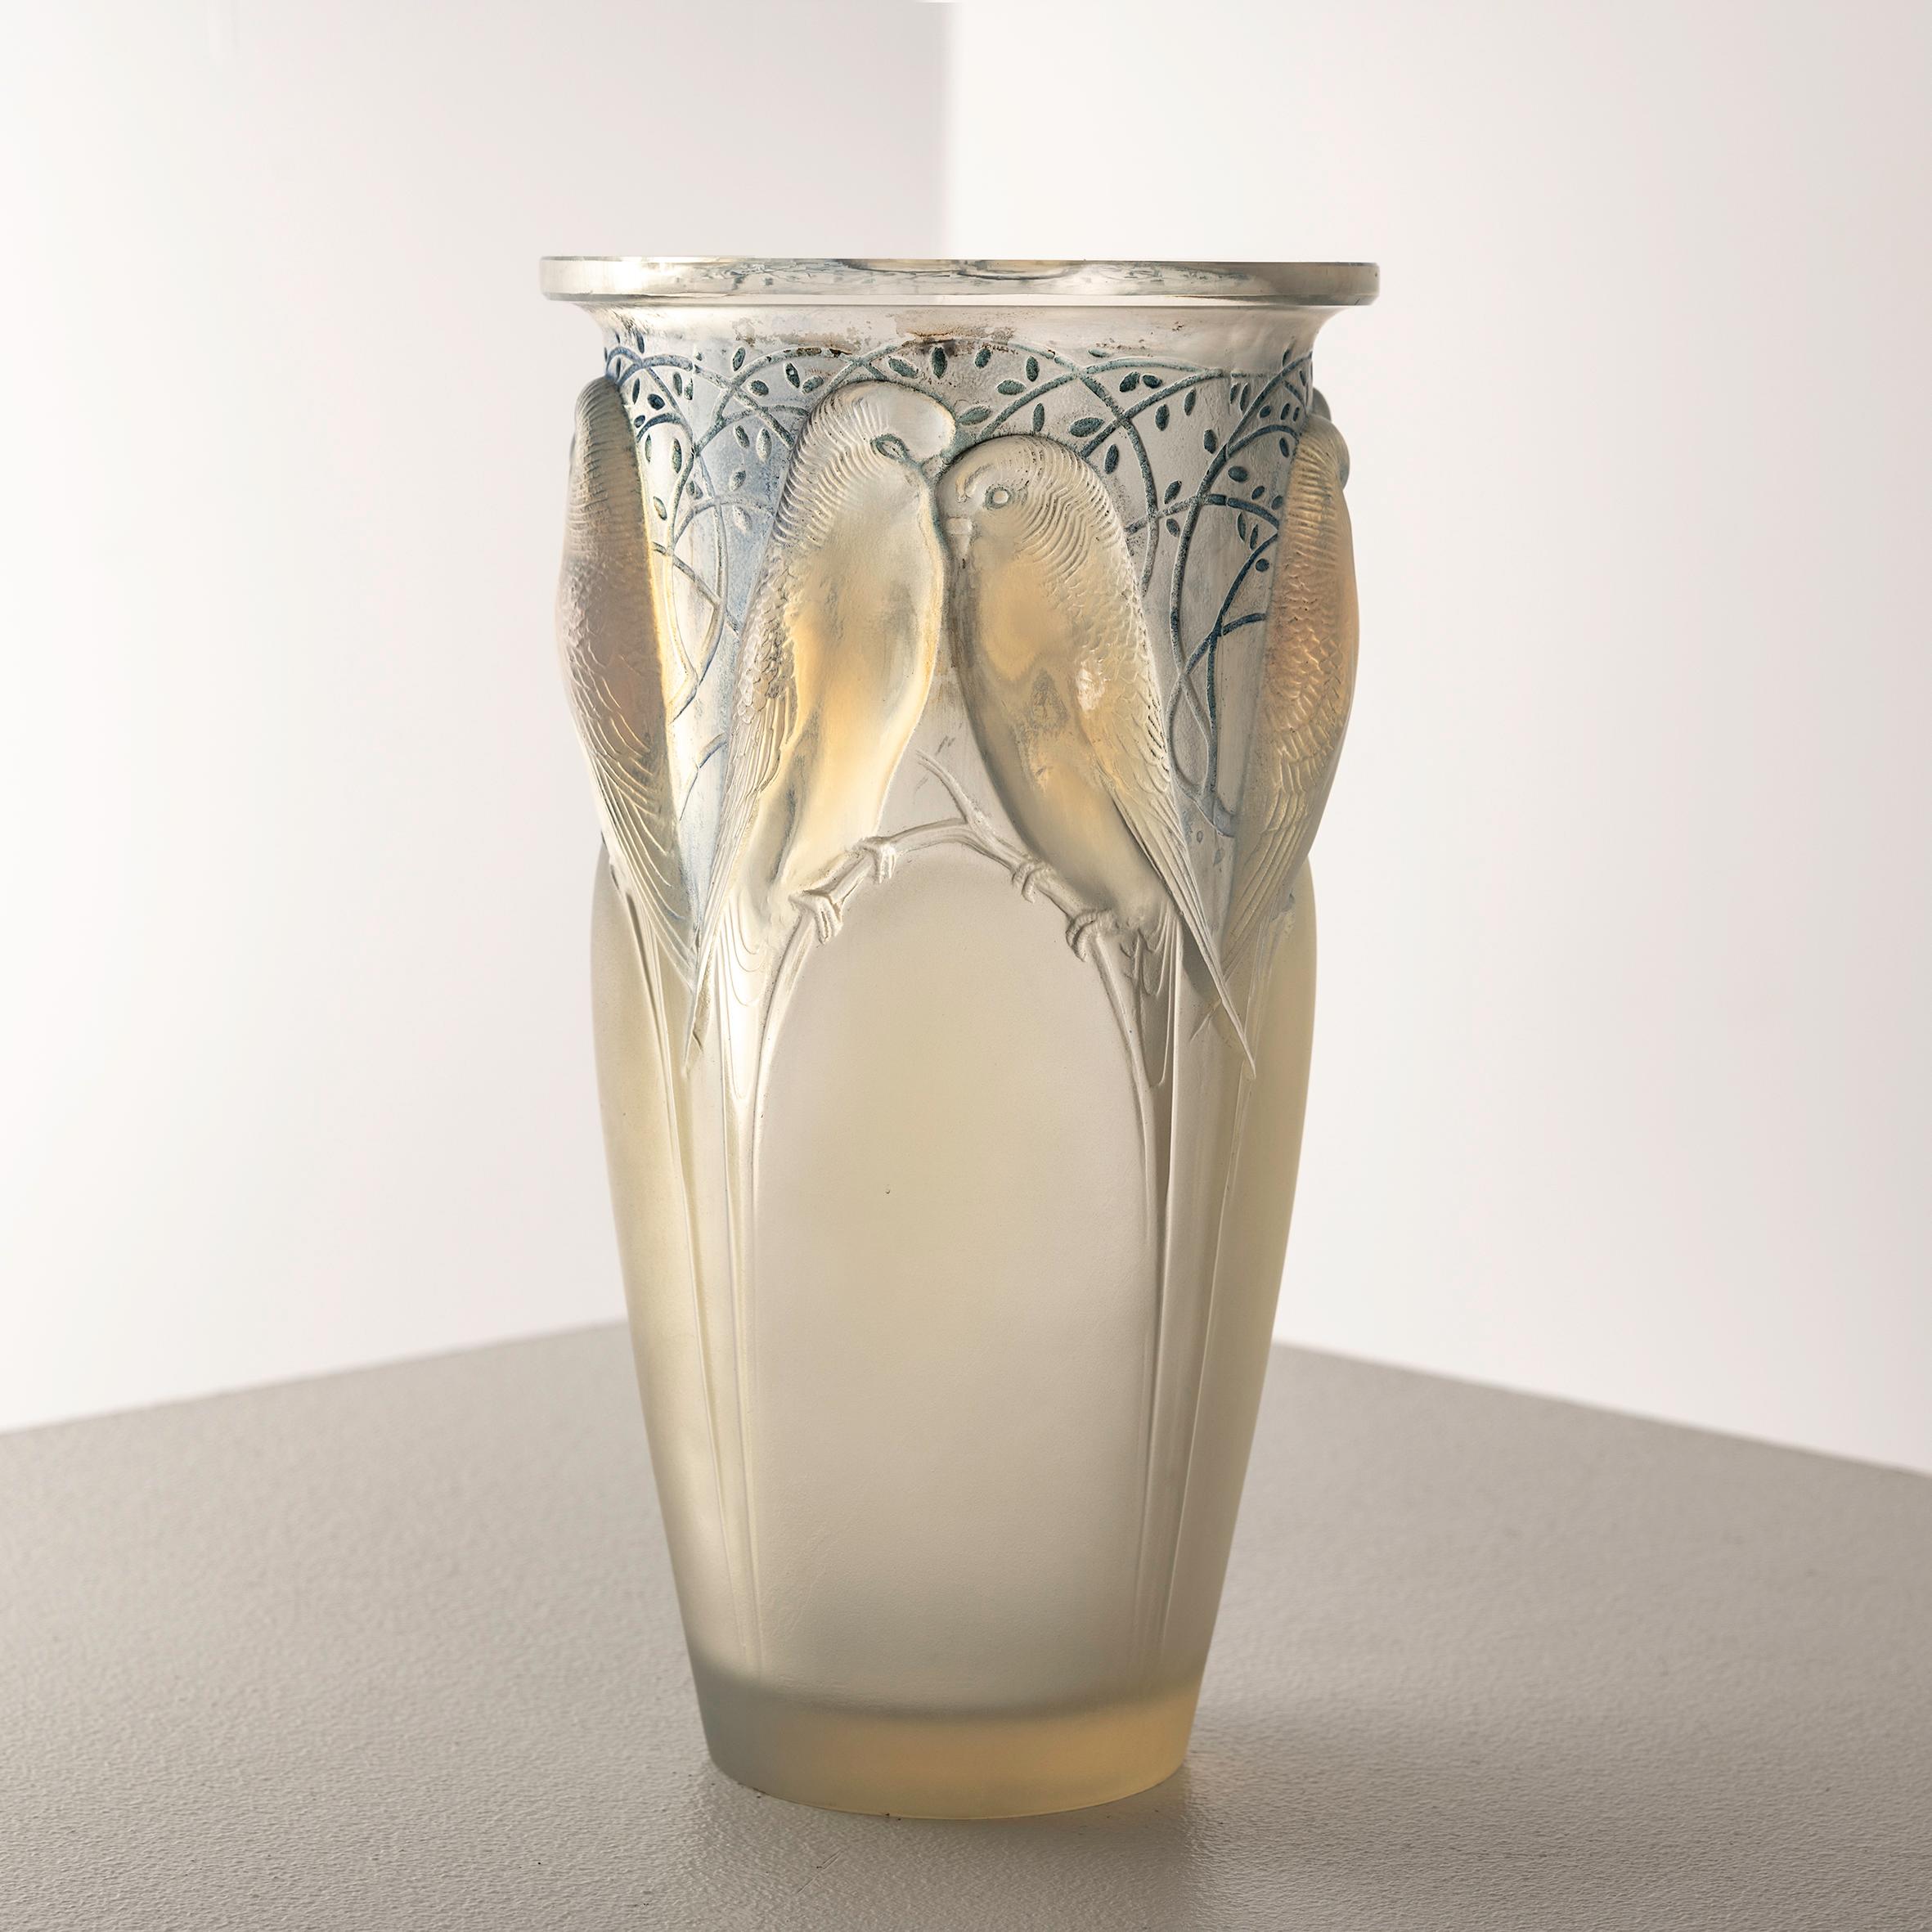 An opalescent Ceylan vase by René Lalique stands as a shining exemplar of the artist's mastery. This exceptional piece, radiating with opalescent iridescence, showcases the delicate balance between natural motifs and artistic precision. The